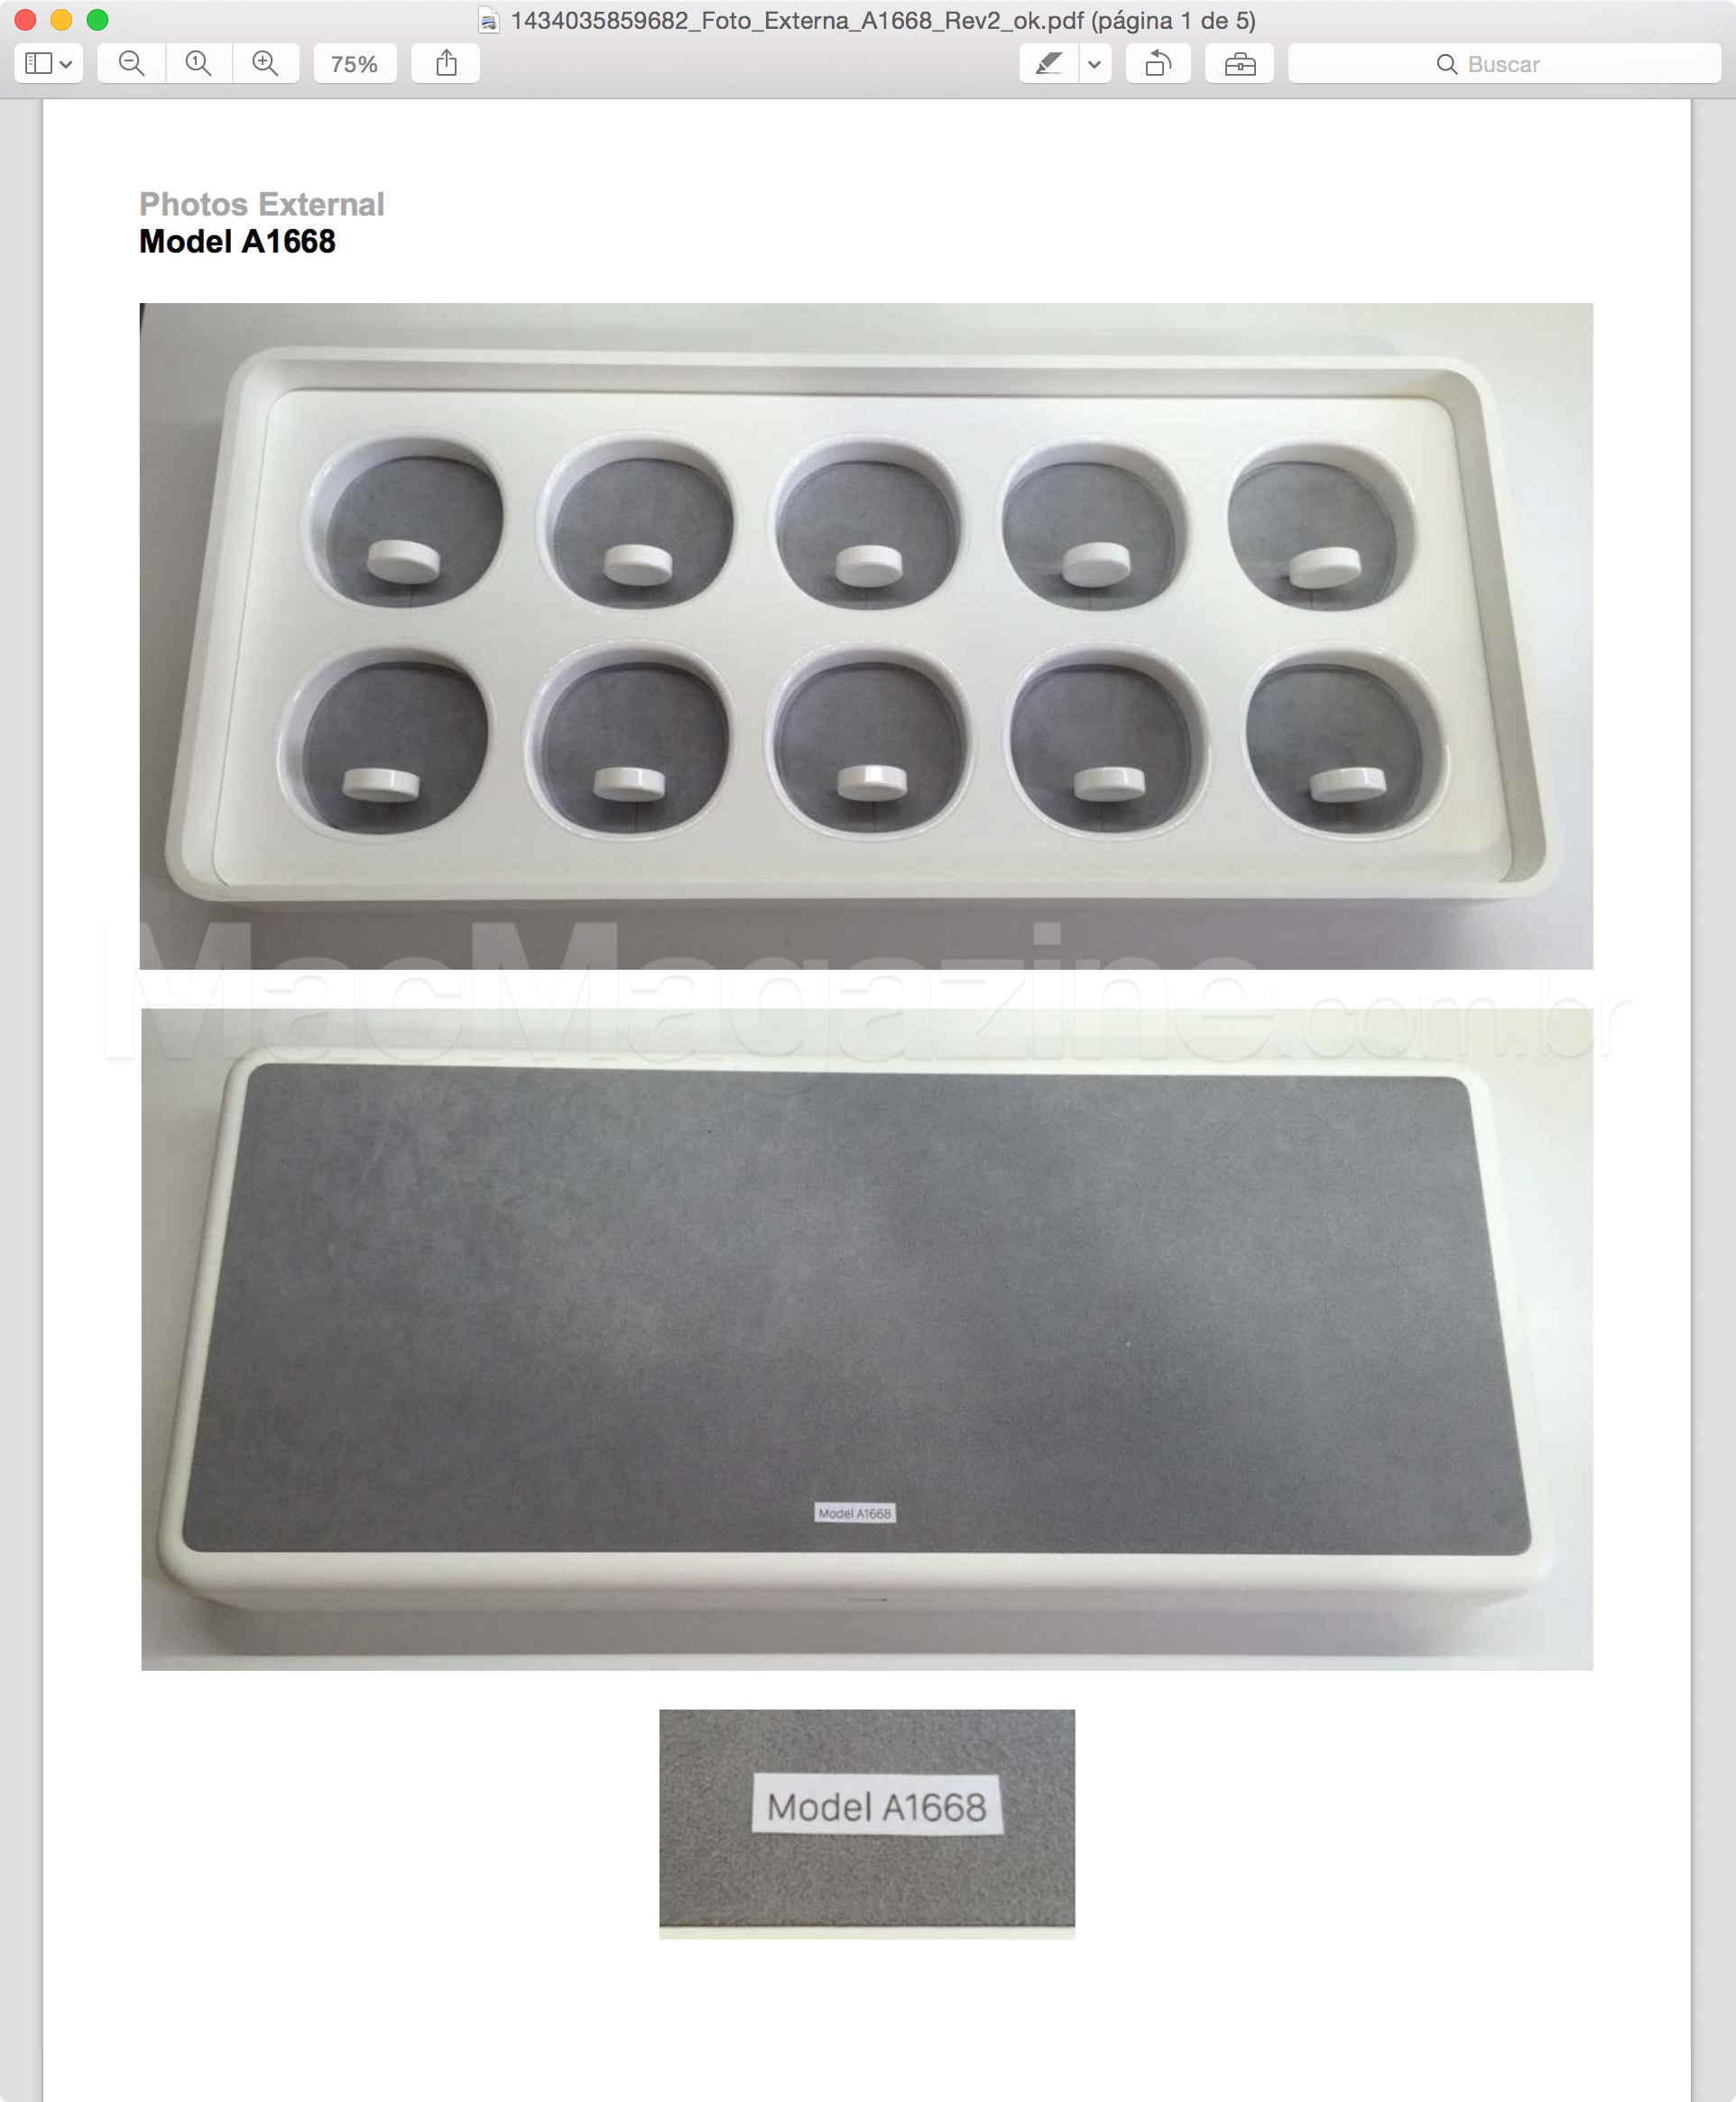 Everything goes through Anatel: Apple Watches tray and Edition box are approved